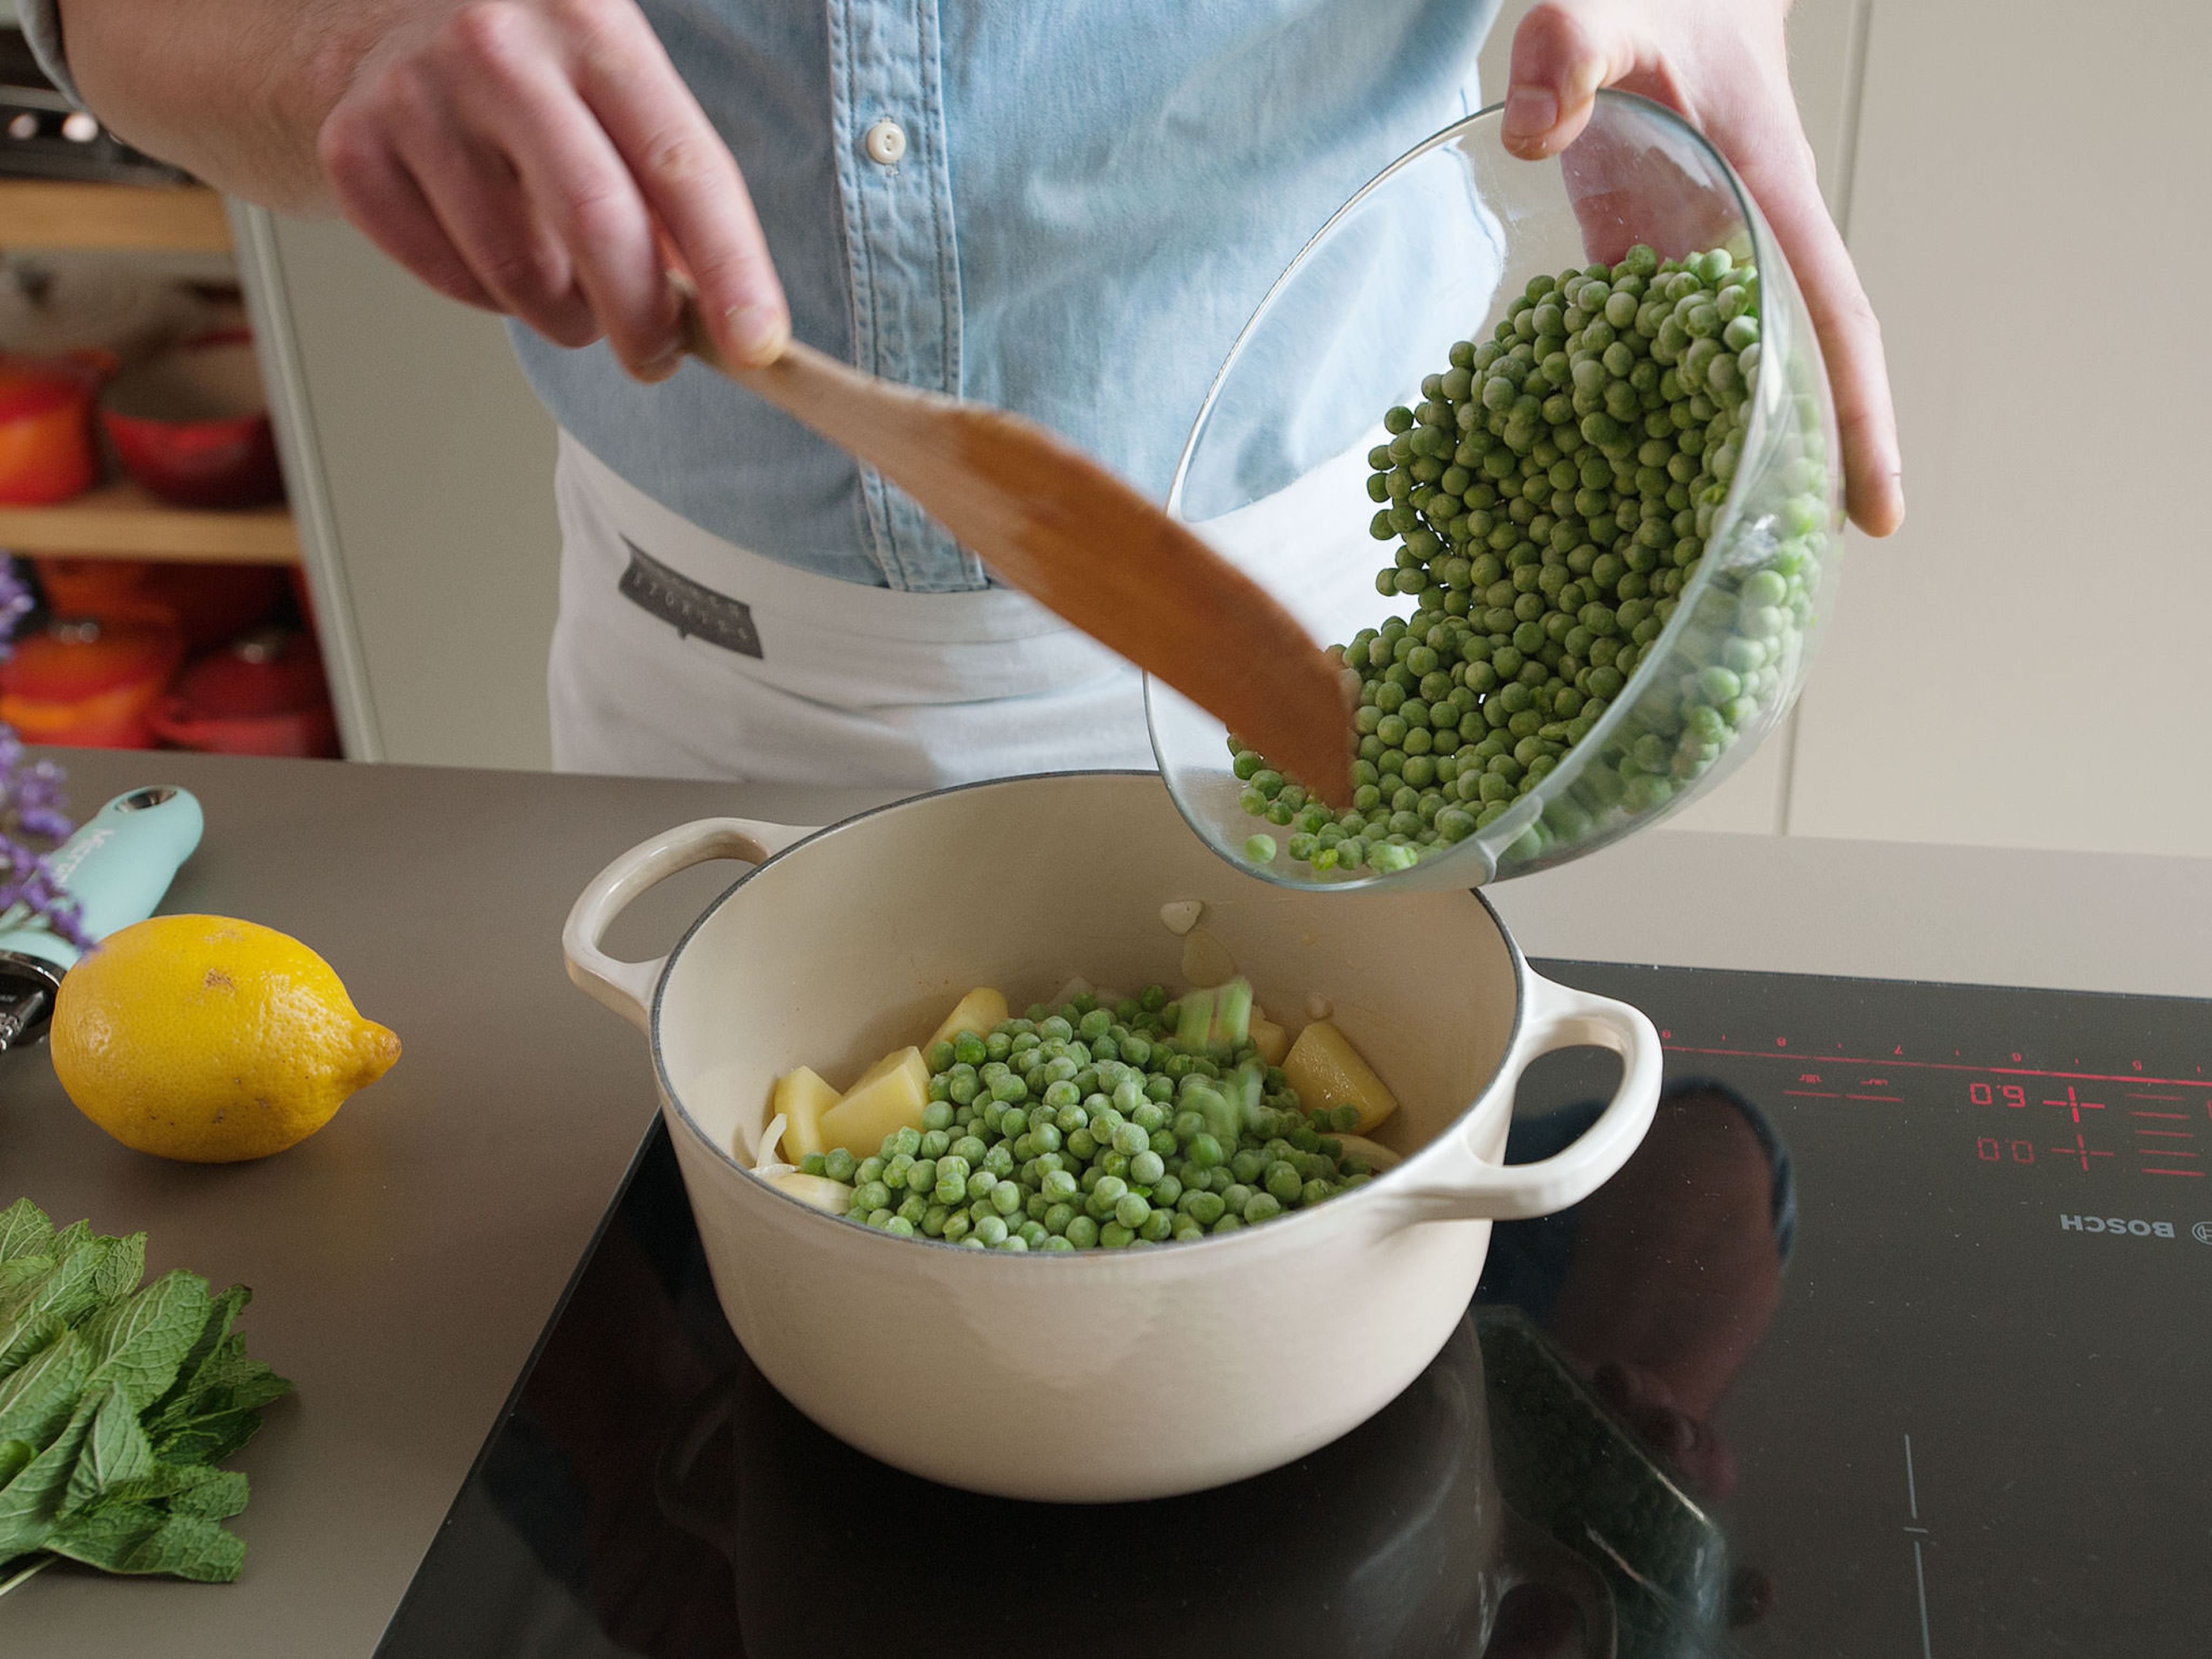 Melt butter in a large saucepan on medium heat. Add chopped potato, onion, and garlic and sauté for approx. 2 – 3 min. Add some of the frozen peas and some of the mint. Season with salt and pepper and continue to cook for approx. 2 – 3 min.